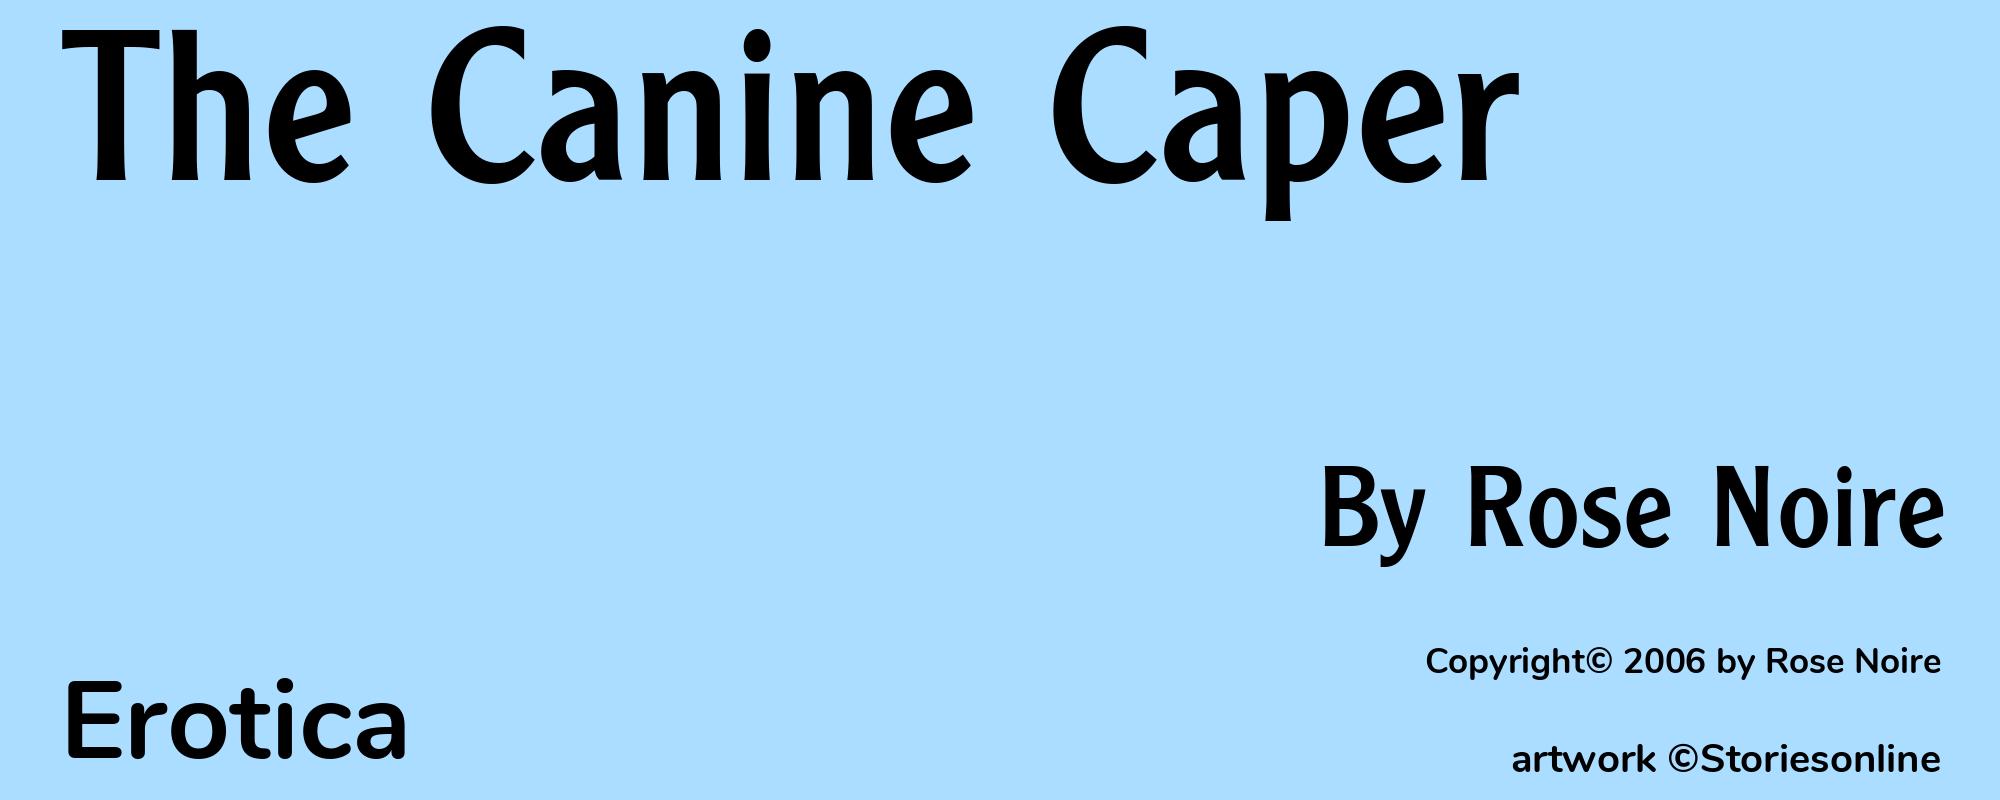 The Canine Caper - Cover